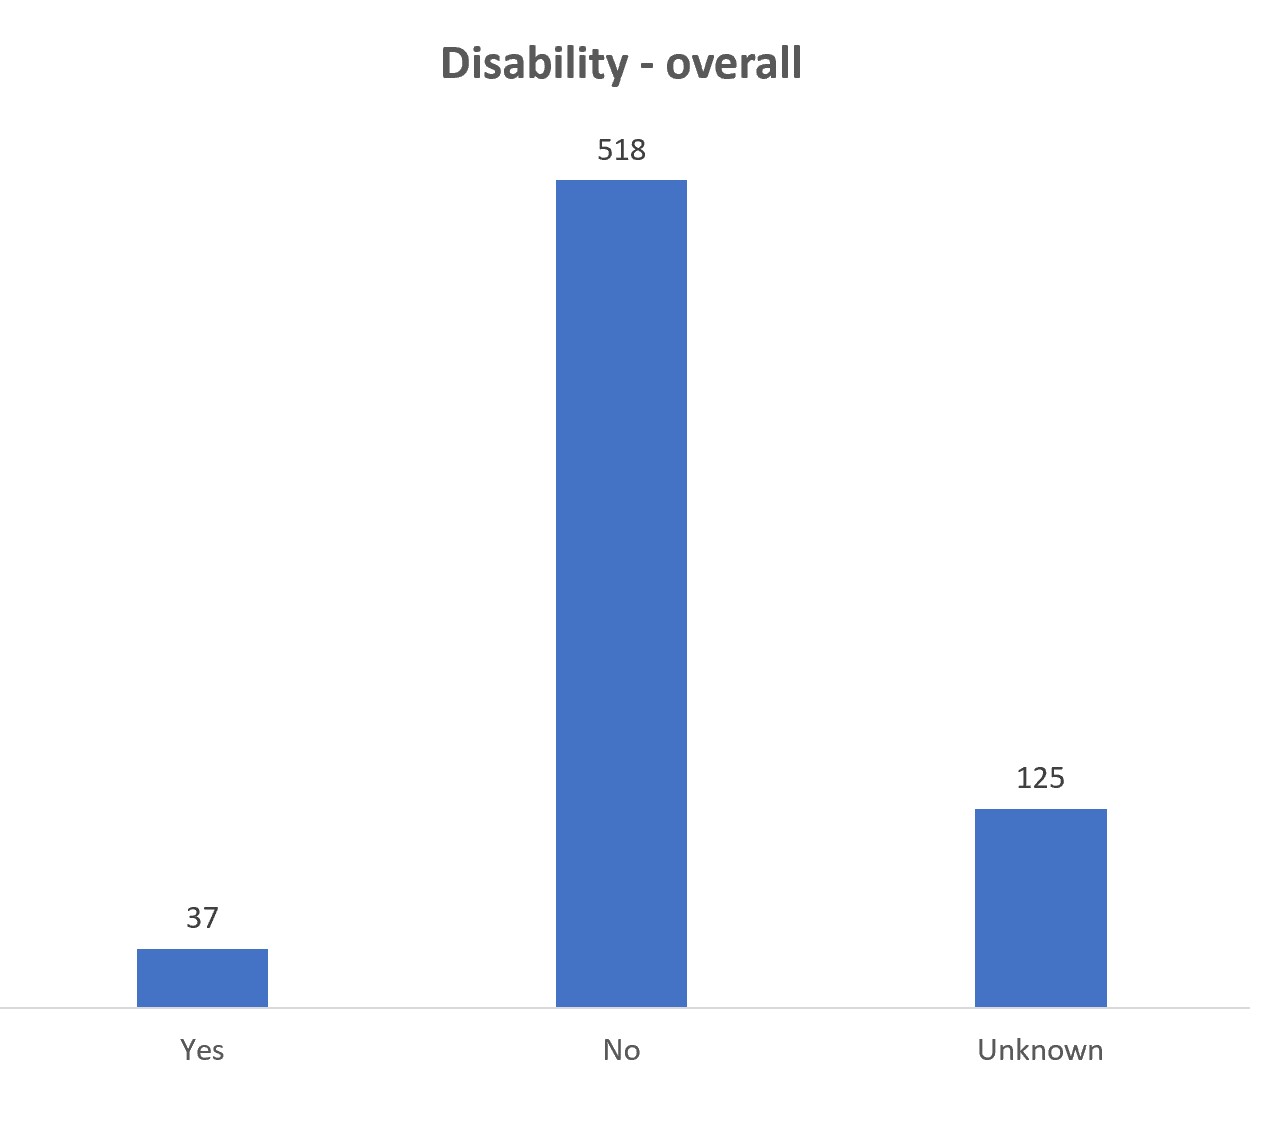 Graph showing whether defendants have a disability or not. The data for this graph can be found in the table above.